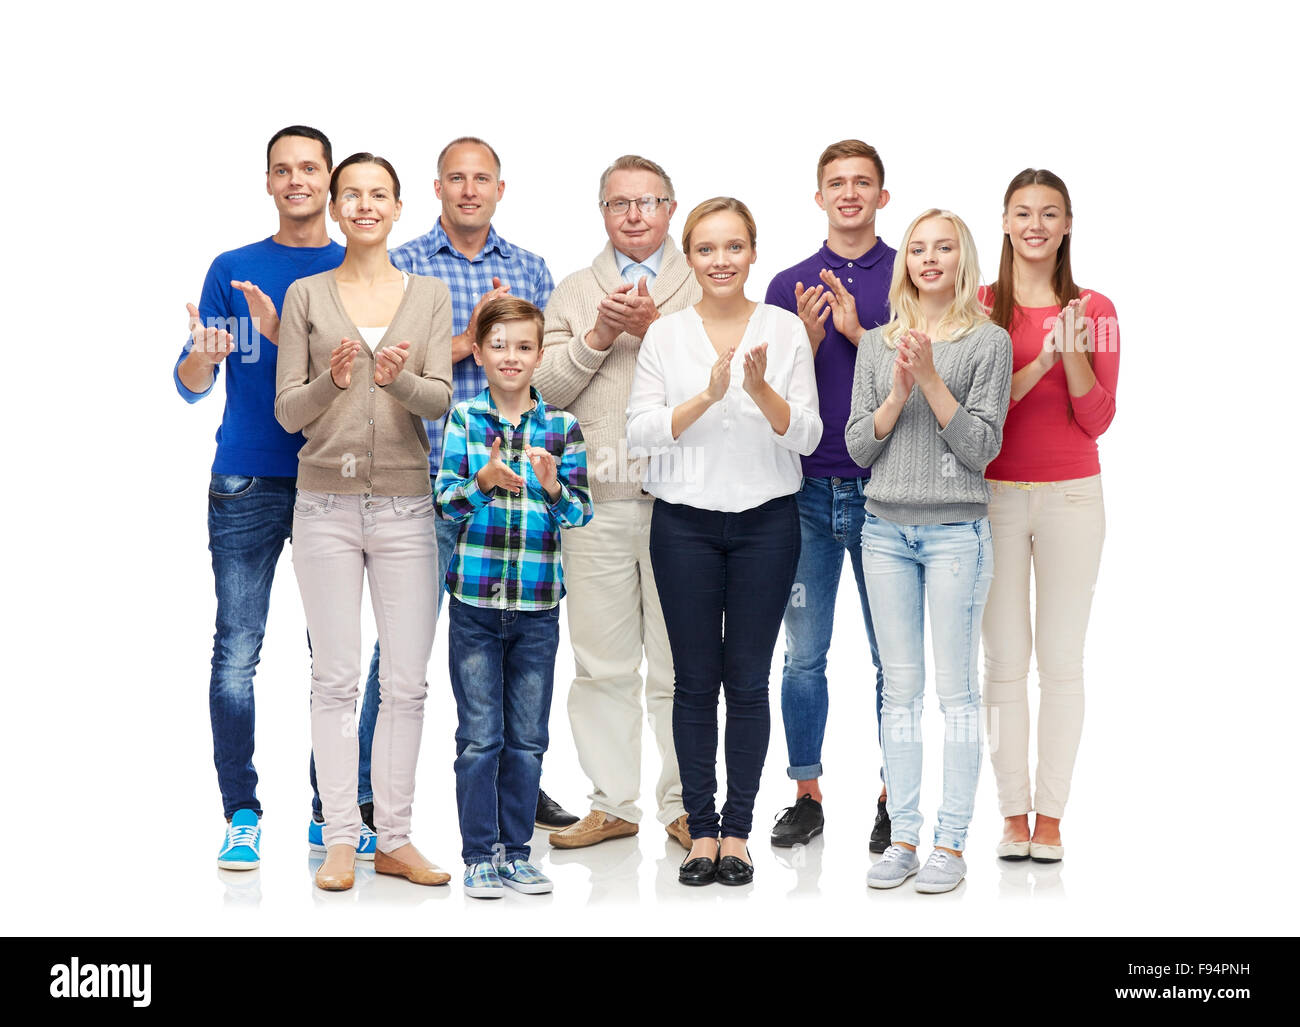 group of smiling people applauding Stock Photo